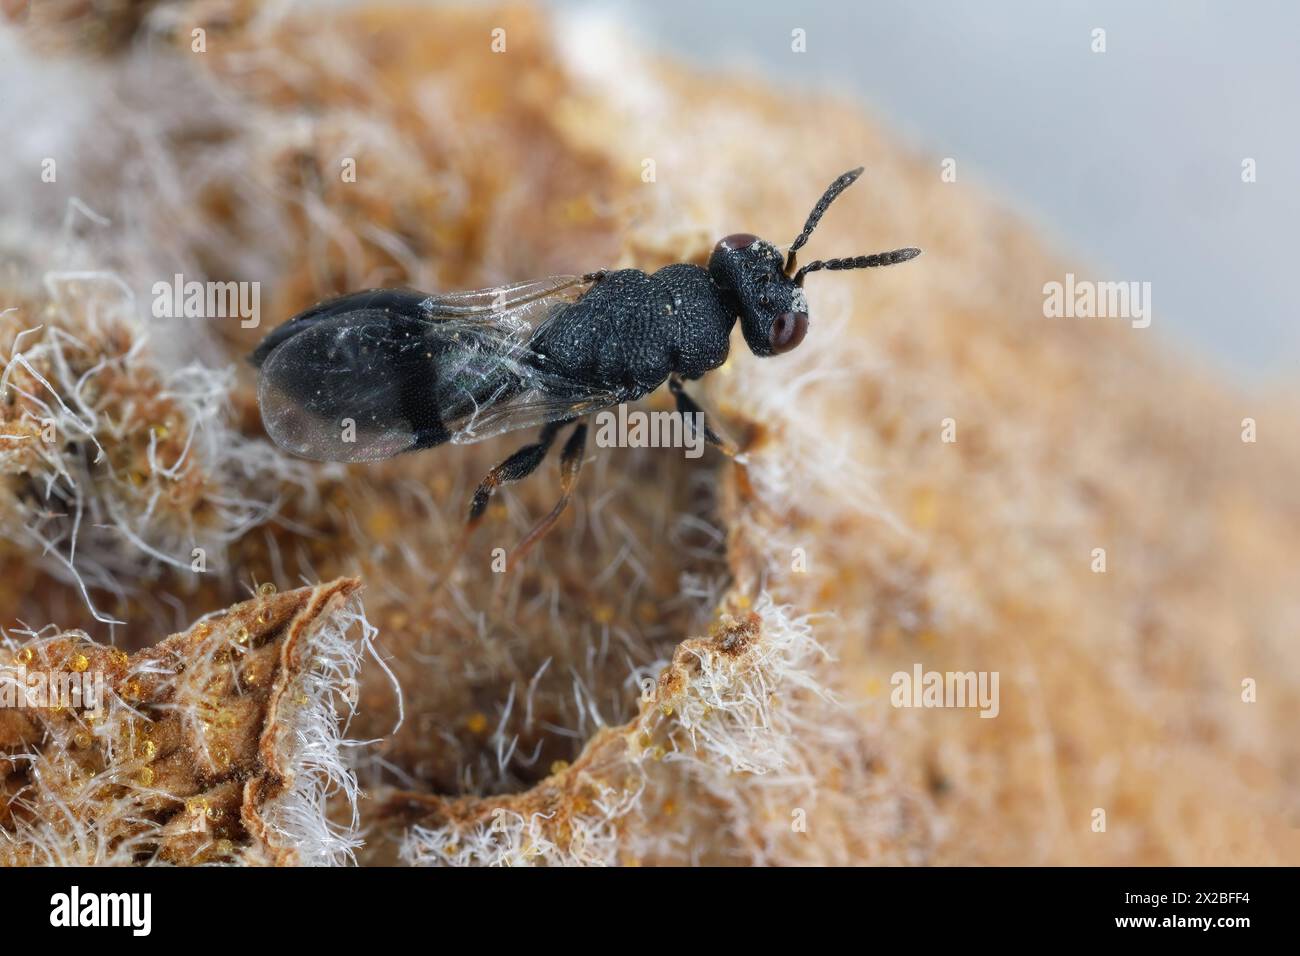 Parasitic, parasitoid wasp. A small hymenopteran whose larvae eat other insects. Stock Photo